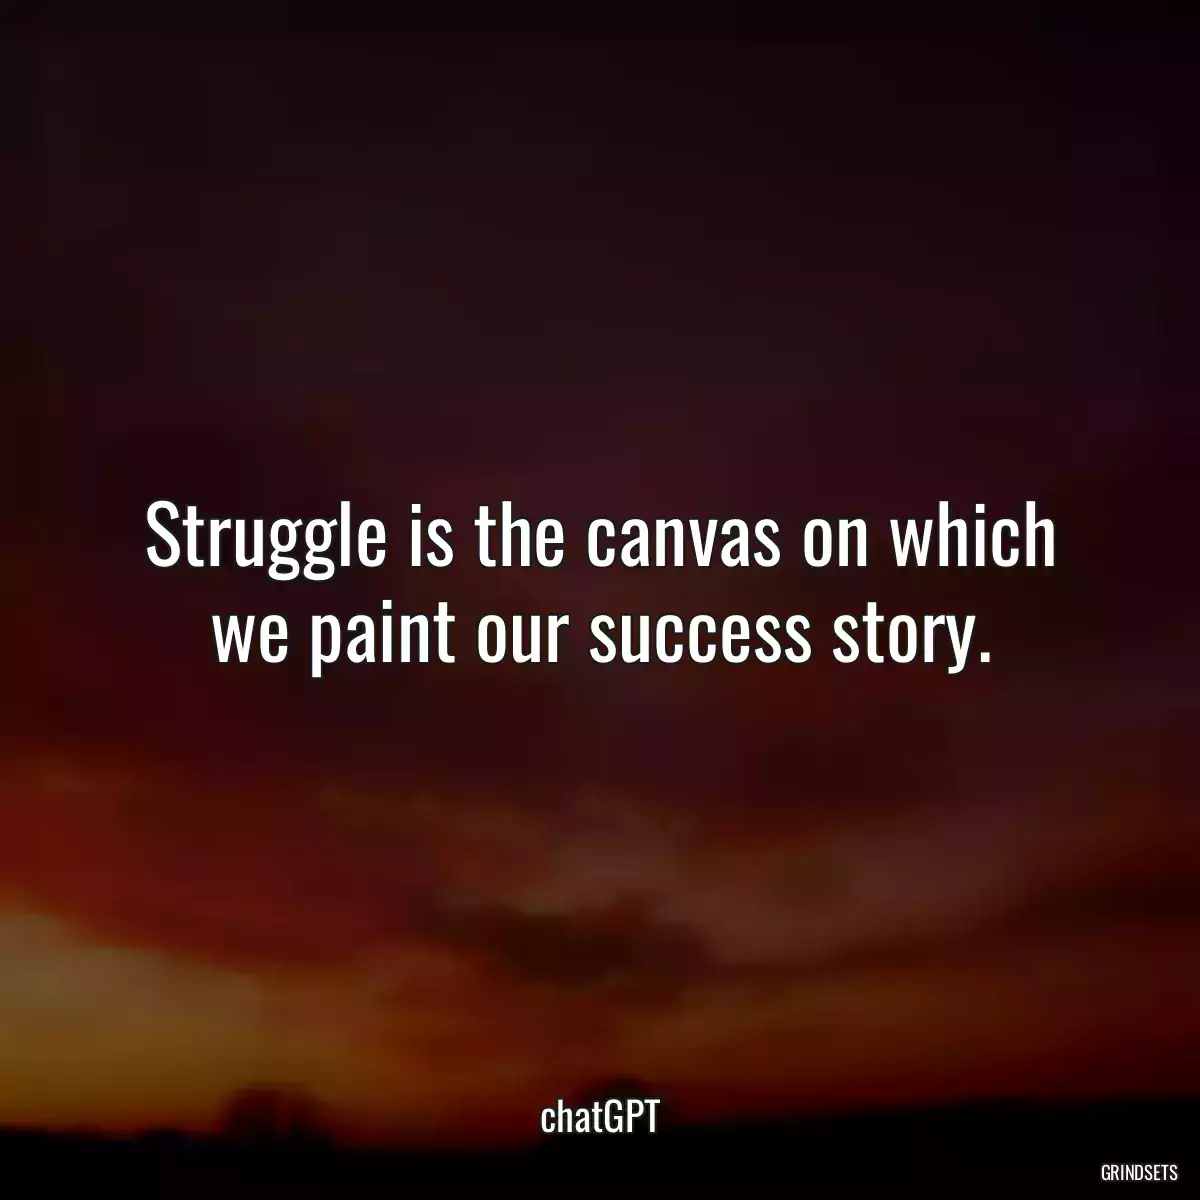 Struggle is the canvas on which we paint our success story.